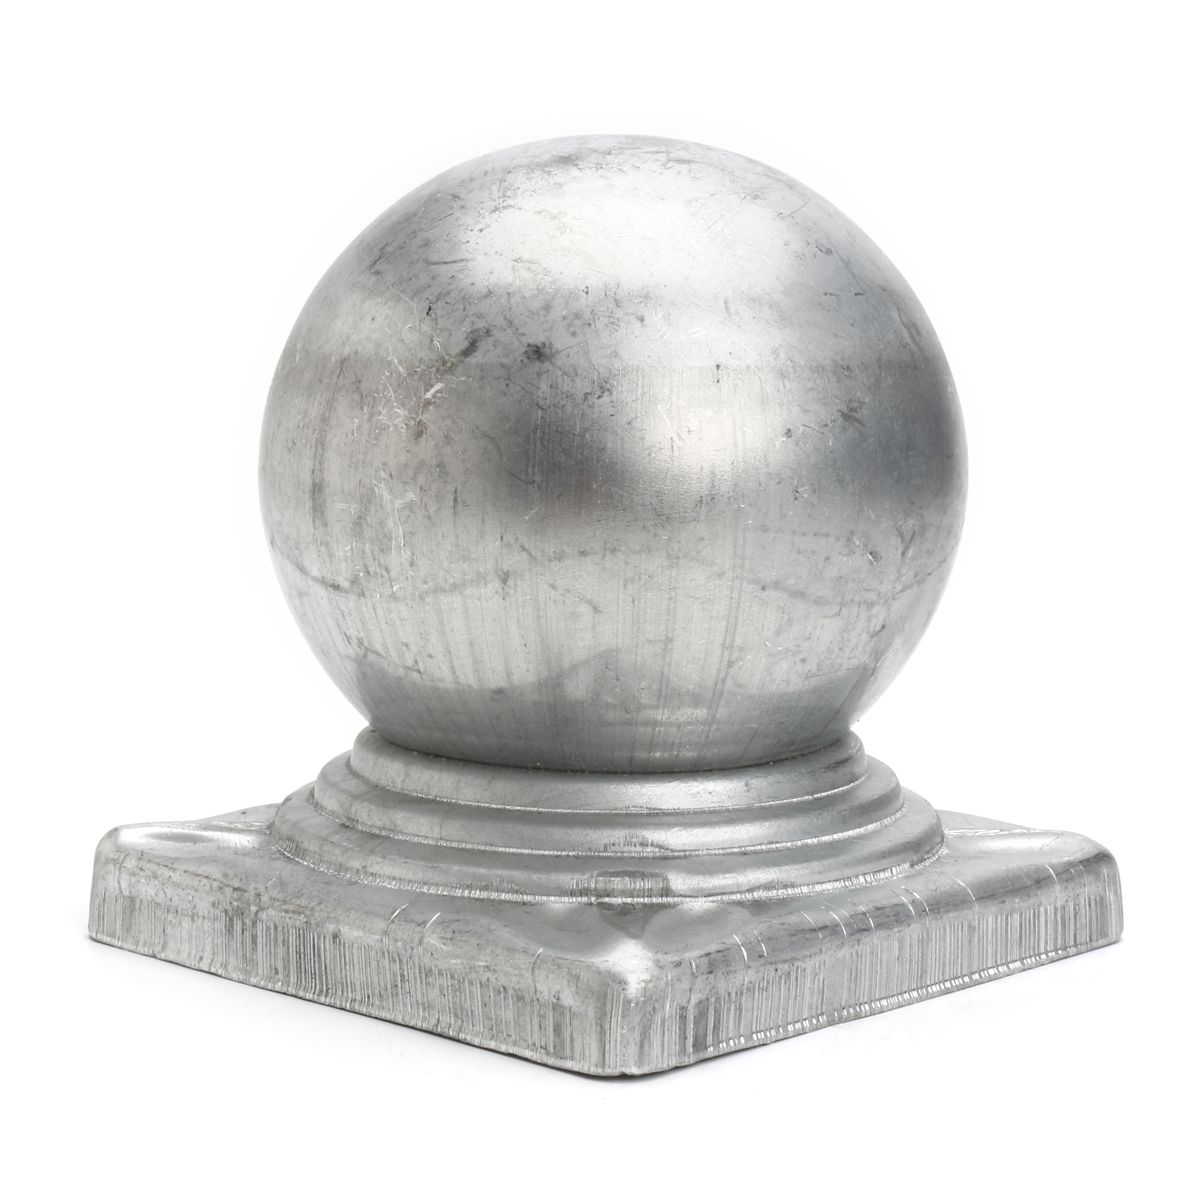 100mm-Iron-Ball-Top-Fence-Finial-Post-Cap-with-Flat-Square-Base-Decor-Protection-1209791